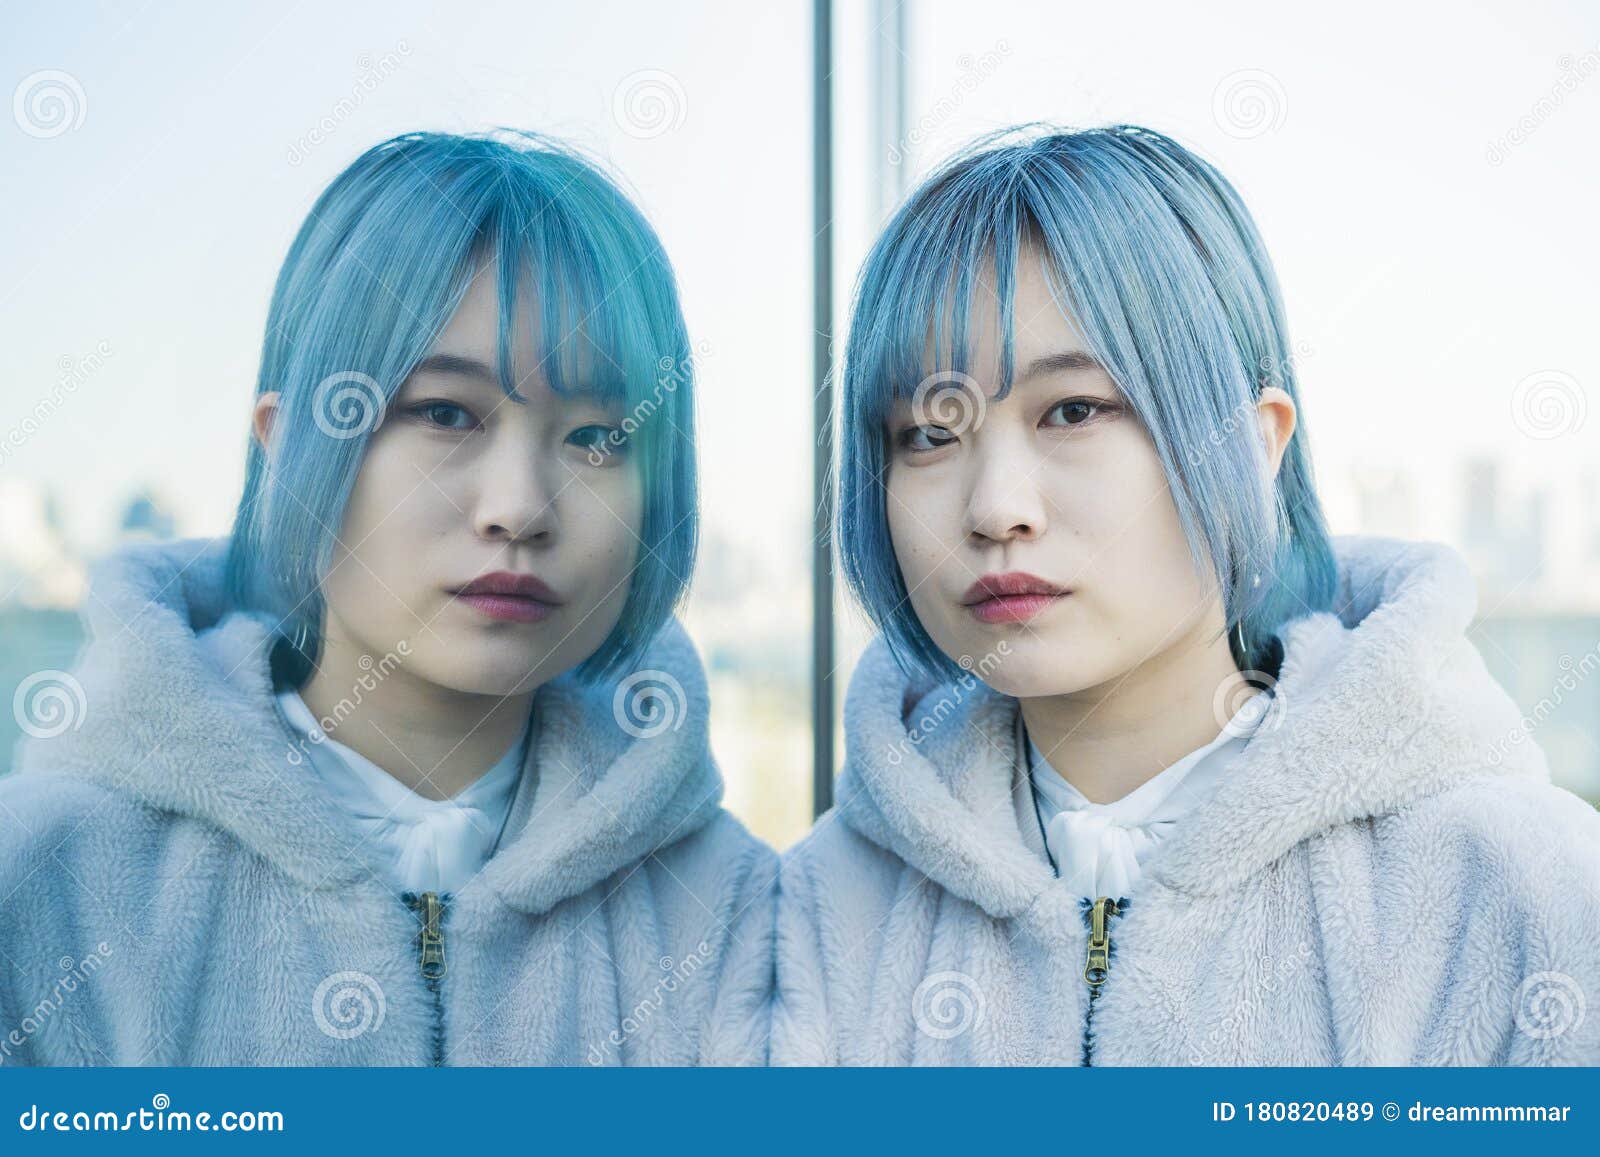 10. "Gray Blue Hair and Asian Men: A Match Made in Hair Heaven" - wide 5